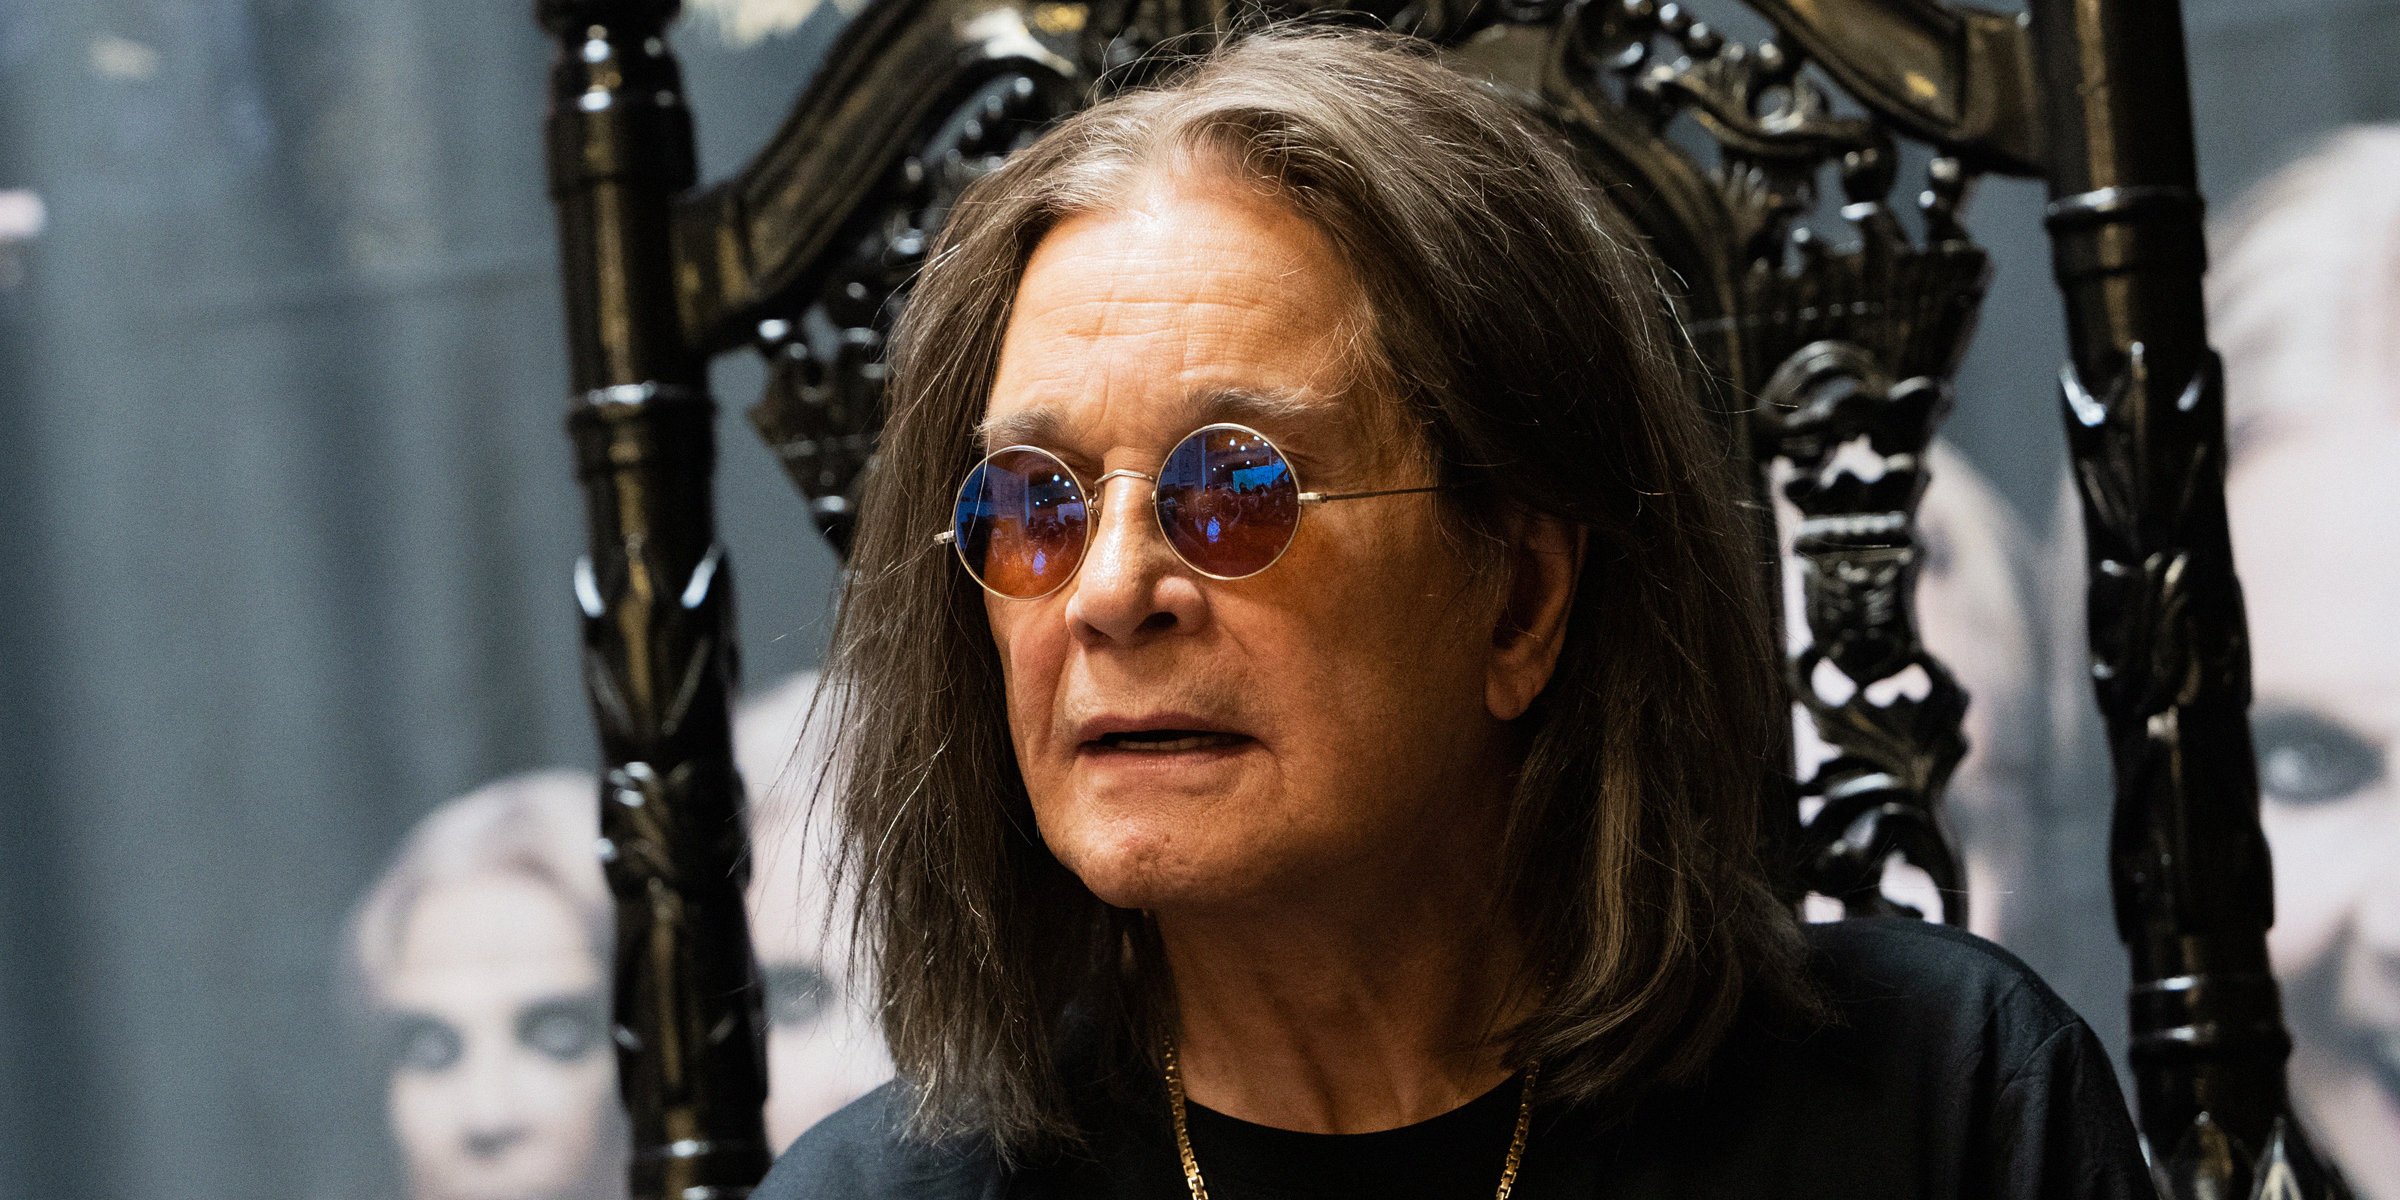 Ozzy Osbourne | Source: Getty Images